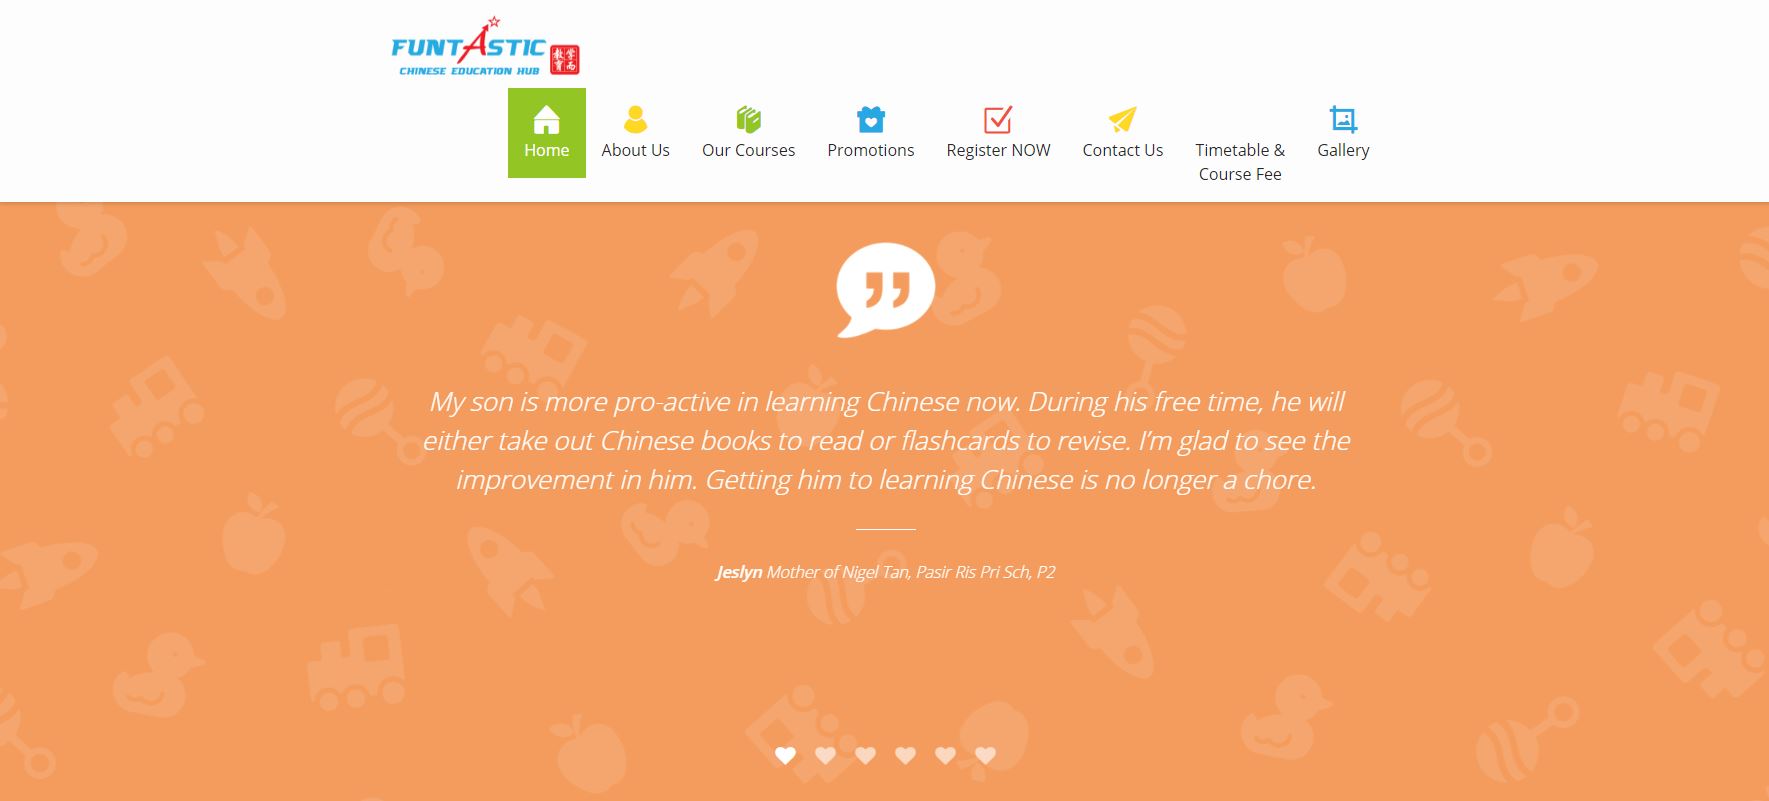 Funtastic-Chinese-Education-Hub-Chinese-Tuition